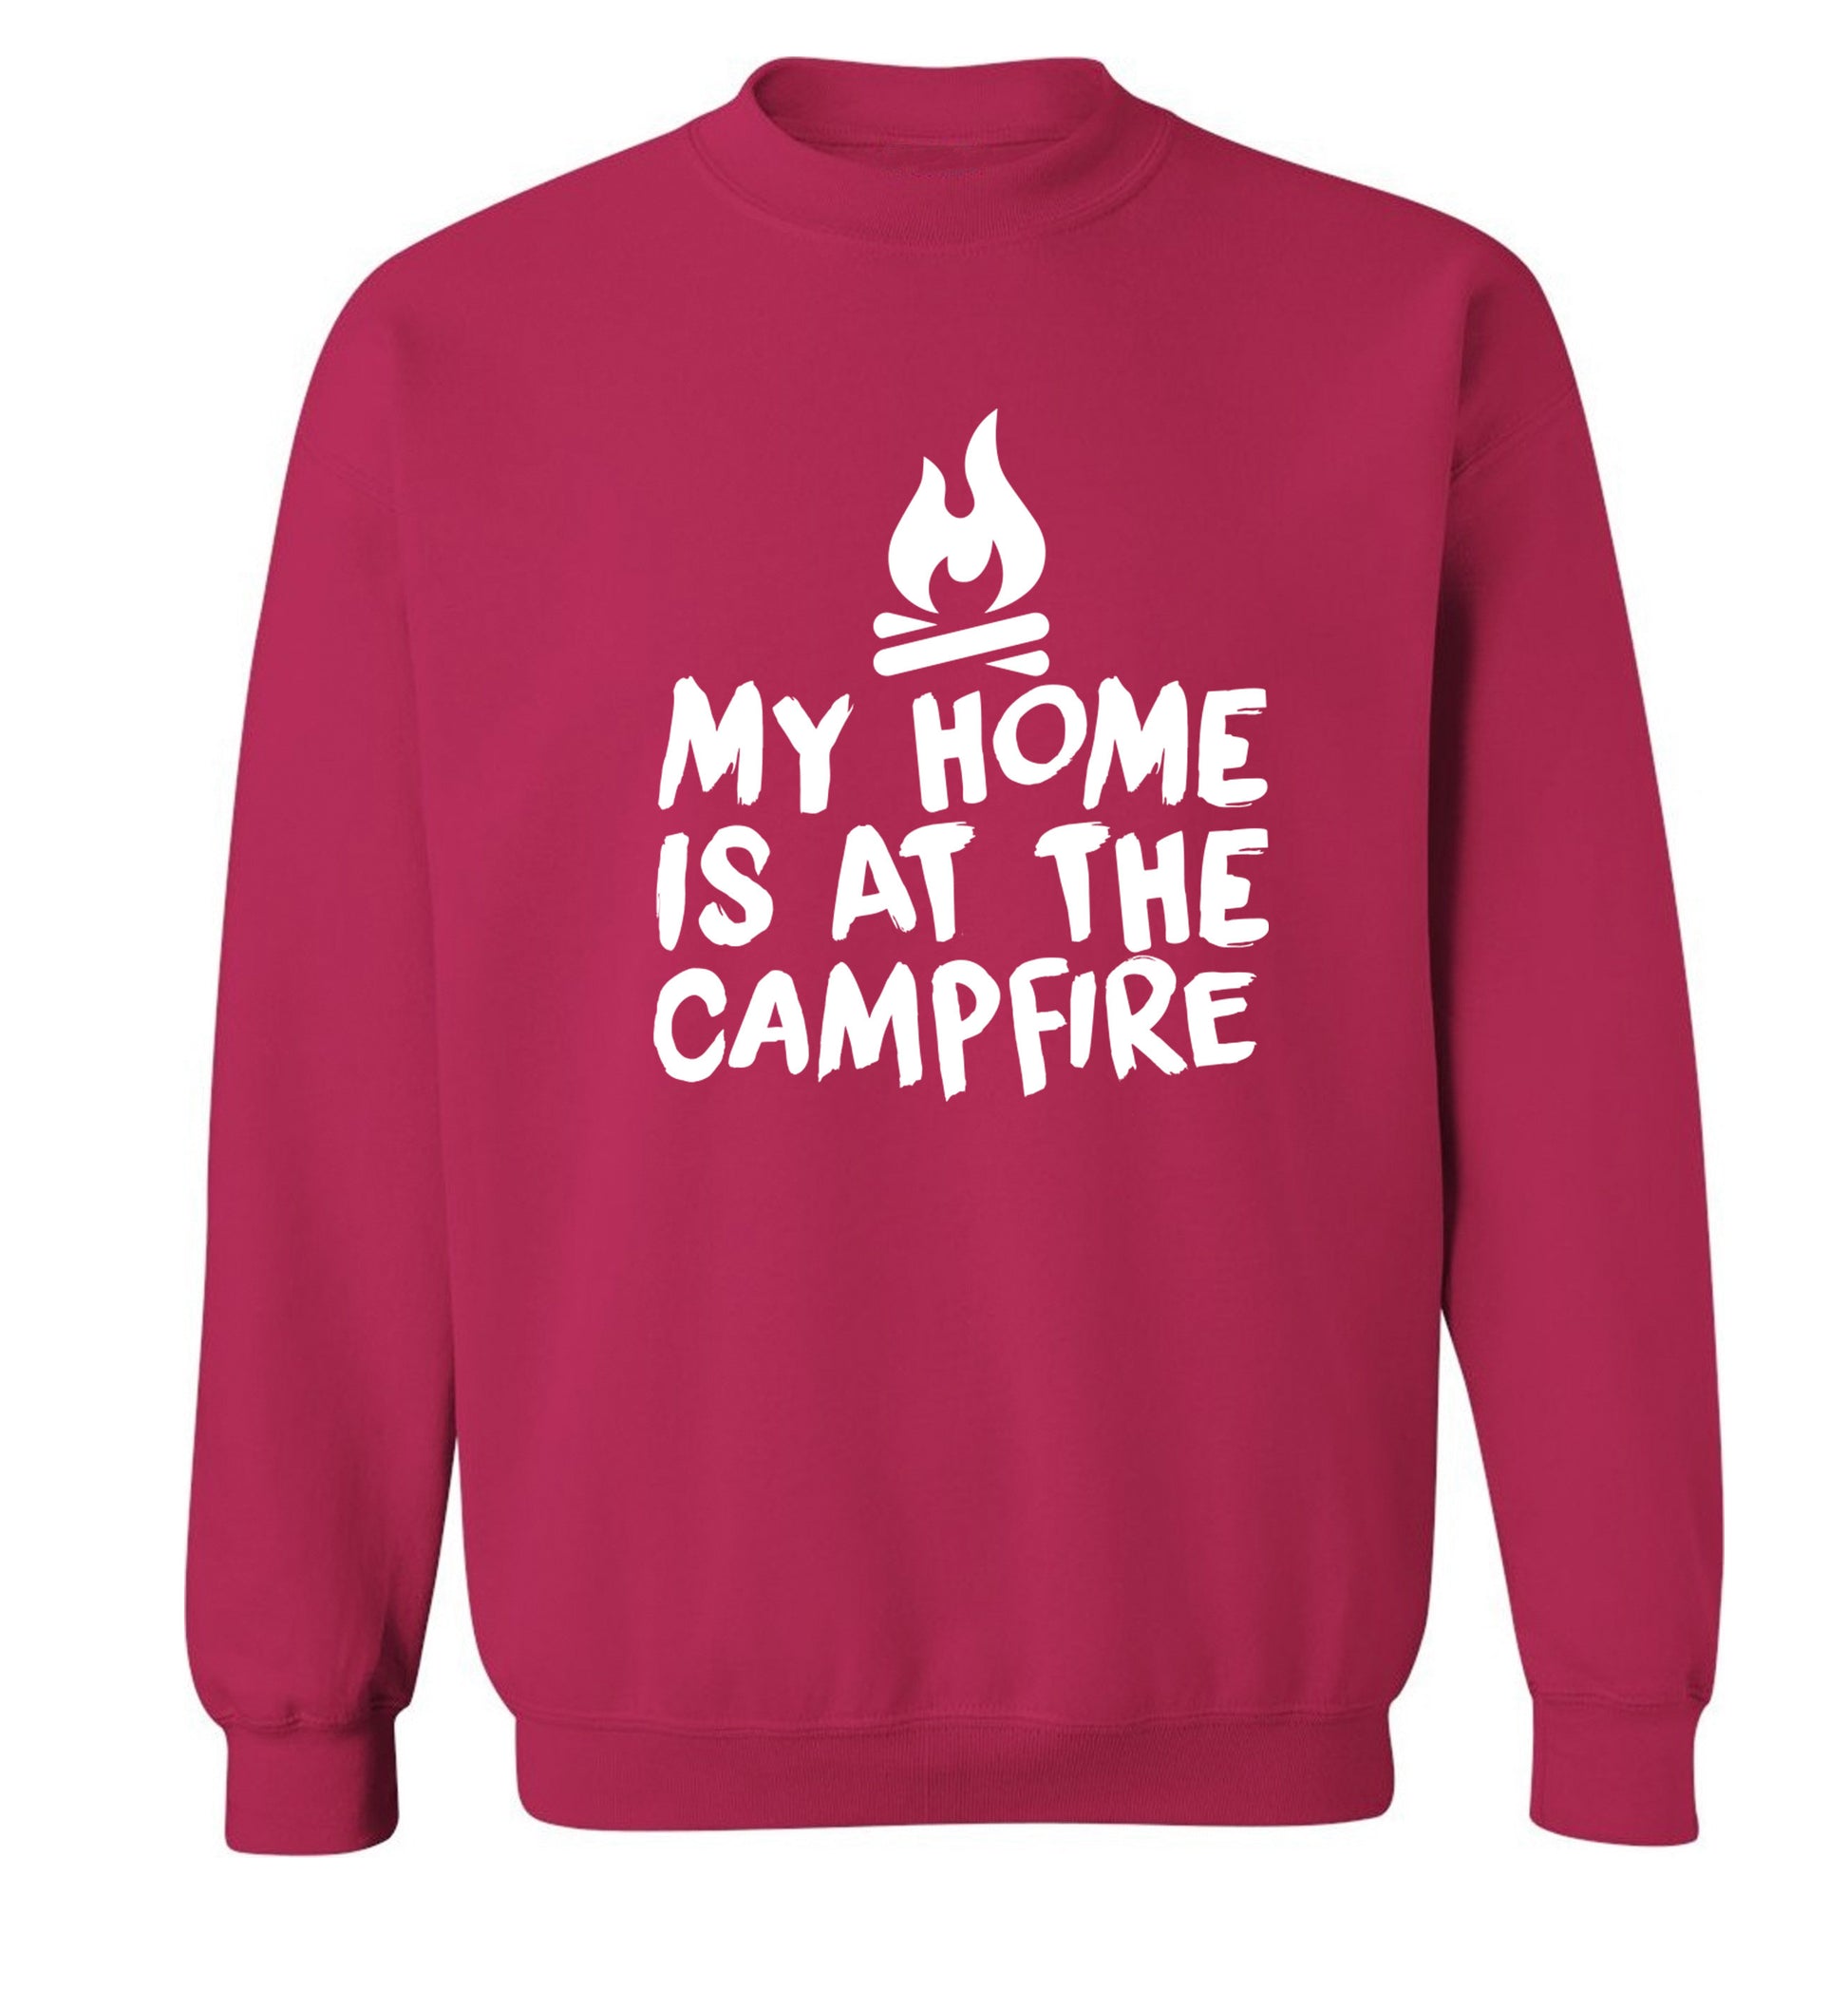 My home is at the campfire Adult's unisex pink Sweater 2XL